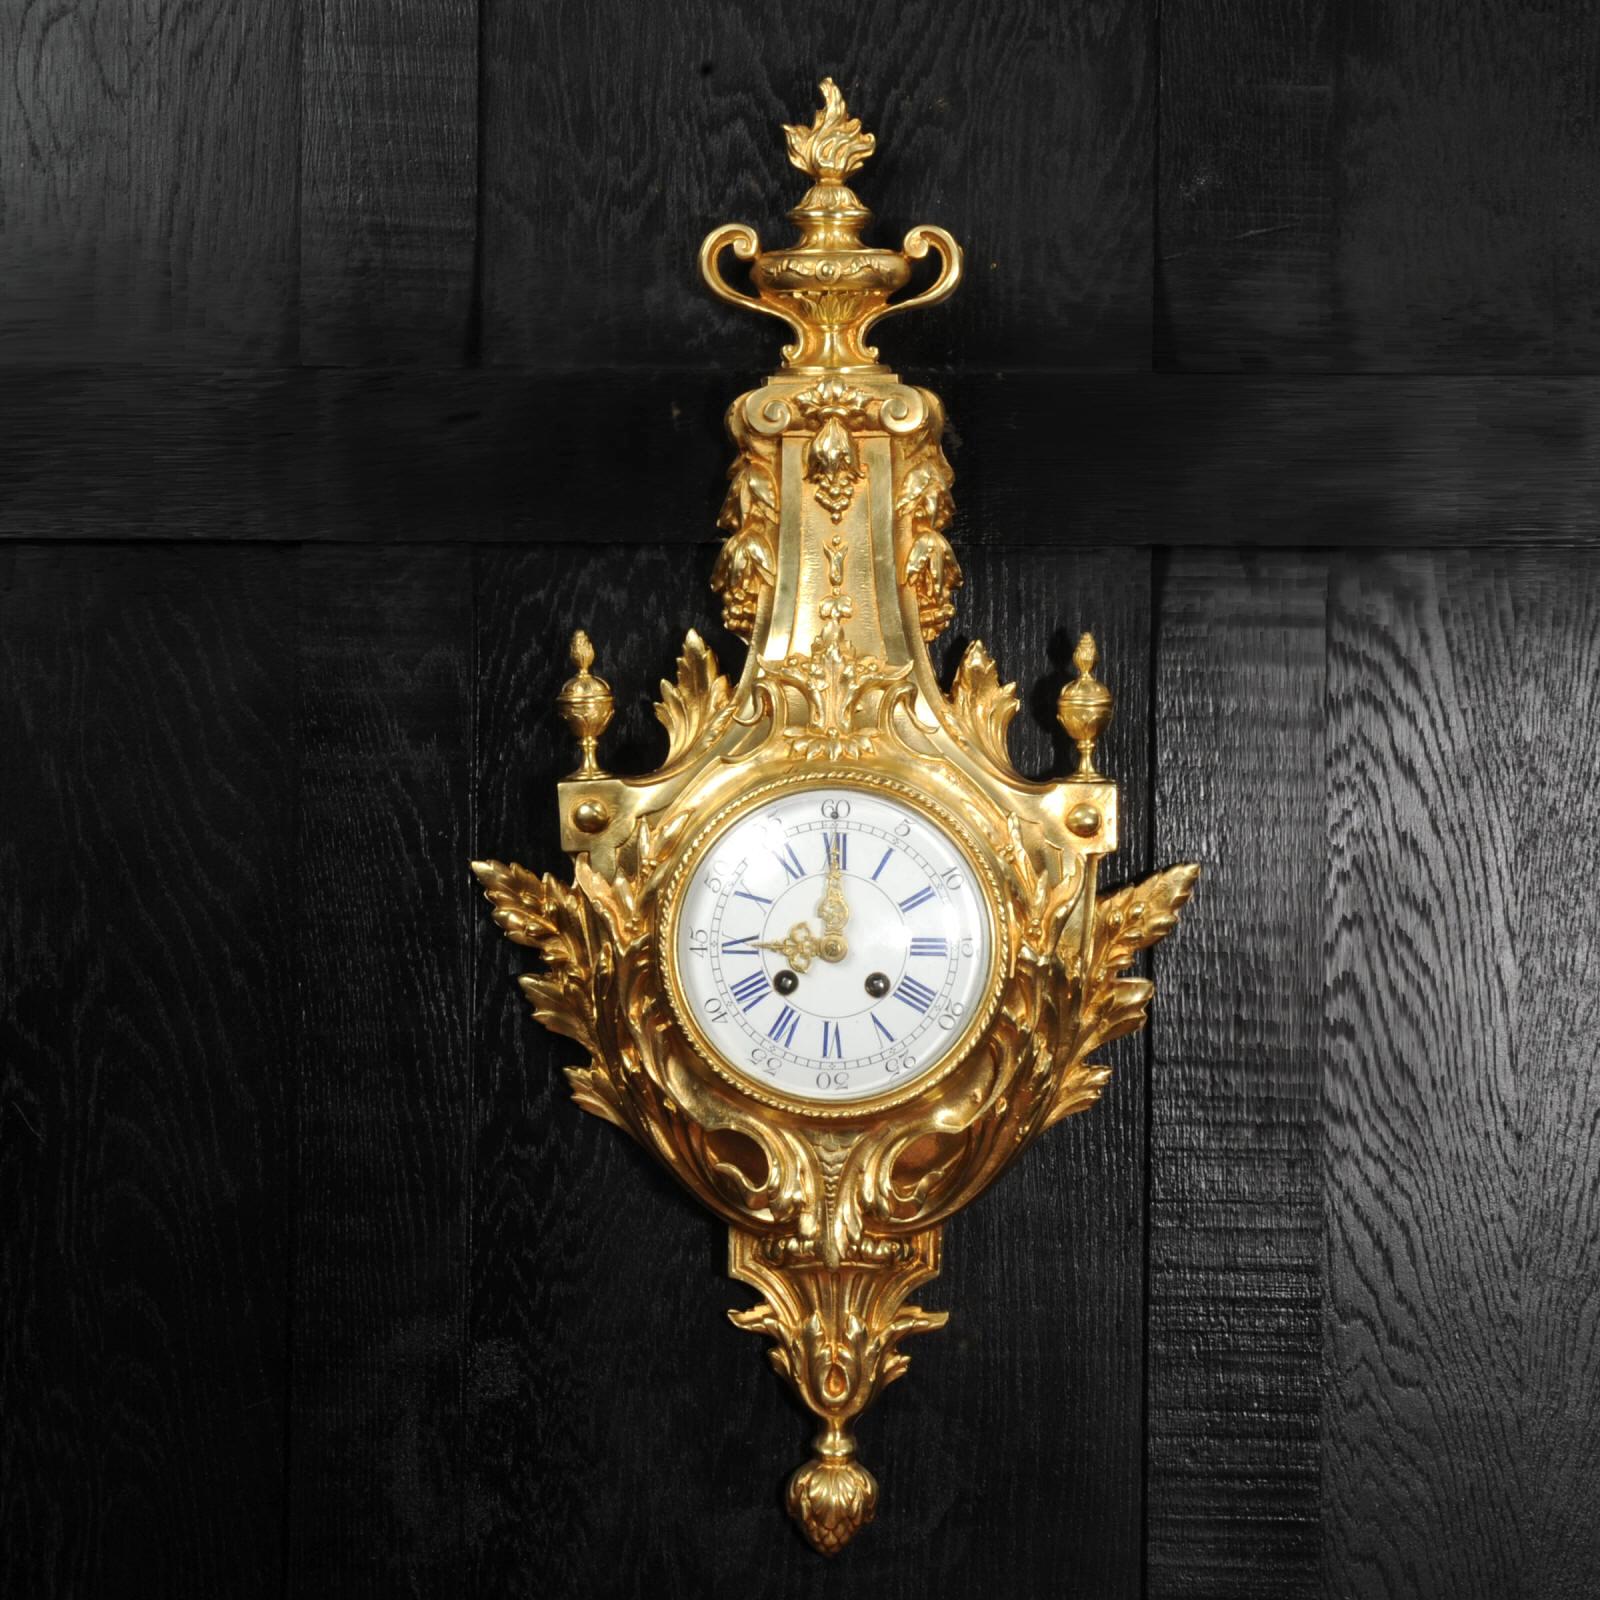 A large and impressive antique French cartel wall clock by A. D. Mougin. Beautifully modelled in the classical style of Louis XVI, in gilded bronze. Shield shaped with acanthus enveloping from the bottom, to the top a flaming urn.

The large dial is